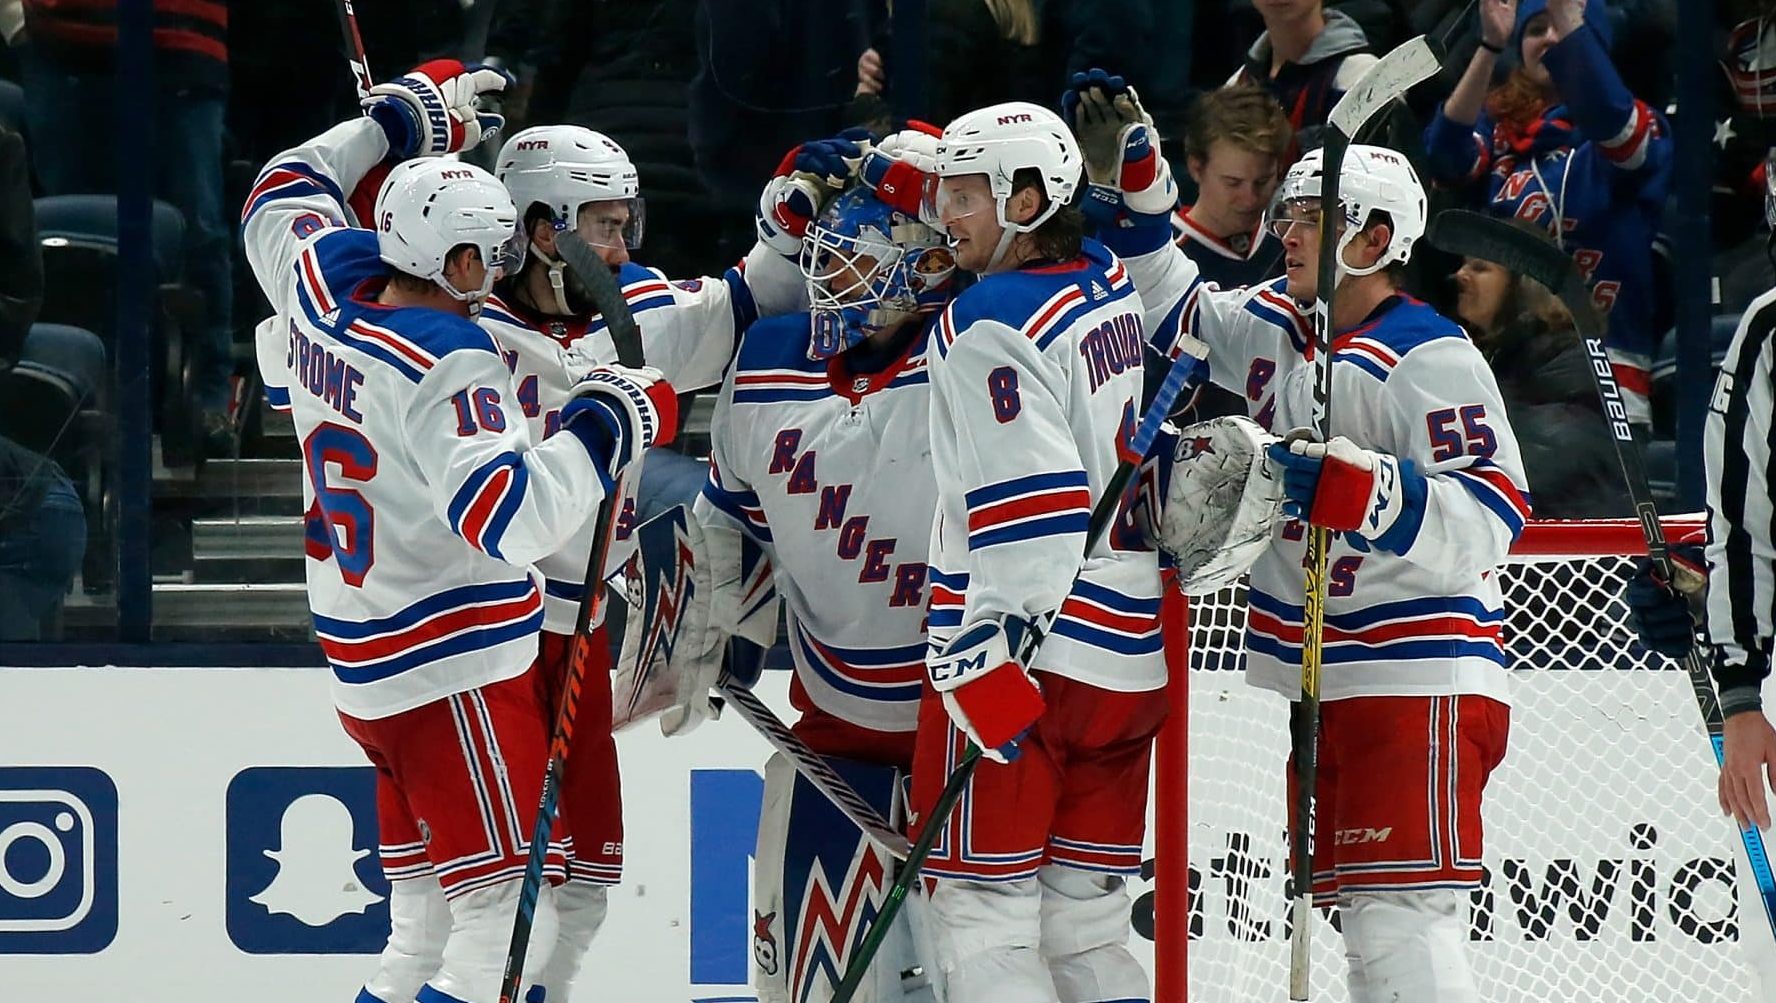 COLUMBUS, OH - DECEMBER 5: Alexandar Georgiev #40 of the New York Rangers is congratulated by his teammates after defeating the Columbus Blue Jackets 3-2 on December 5, 2019 at Nationwide Arena in Columbus, Ohio.